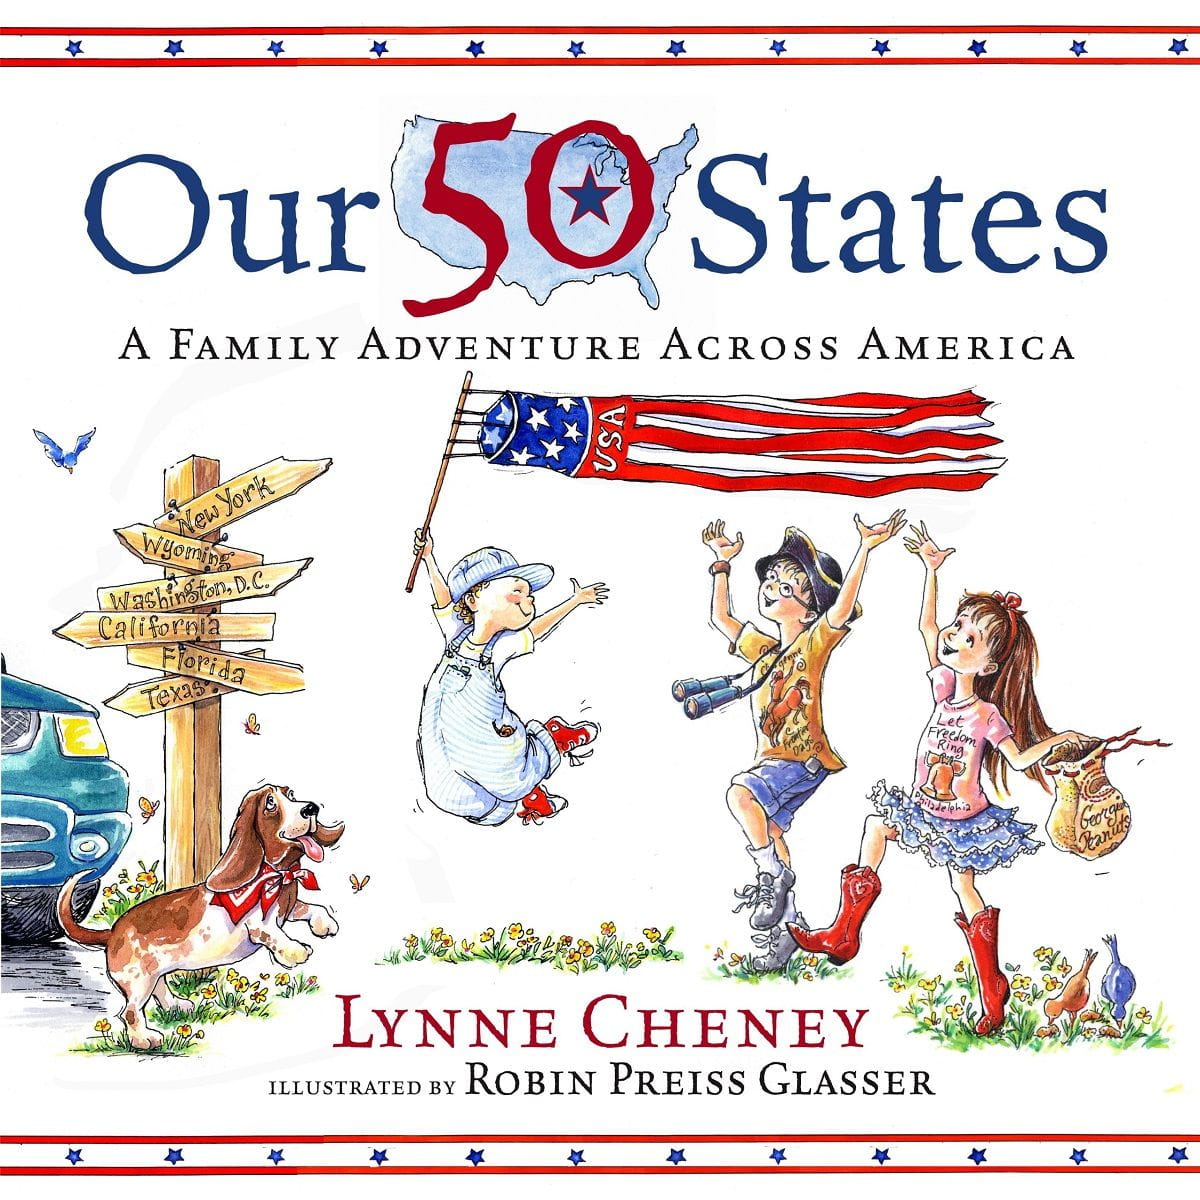 Our 50 States cover